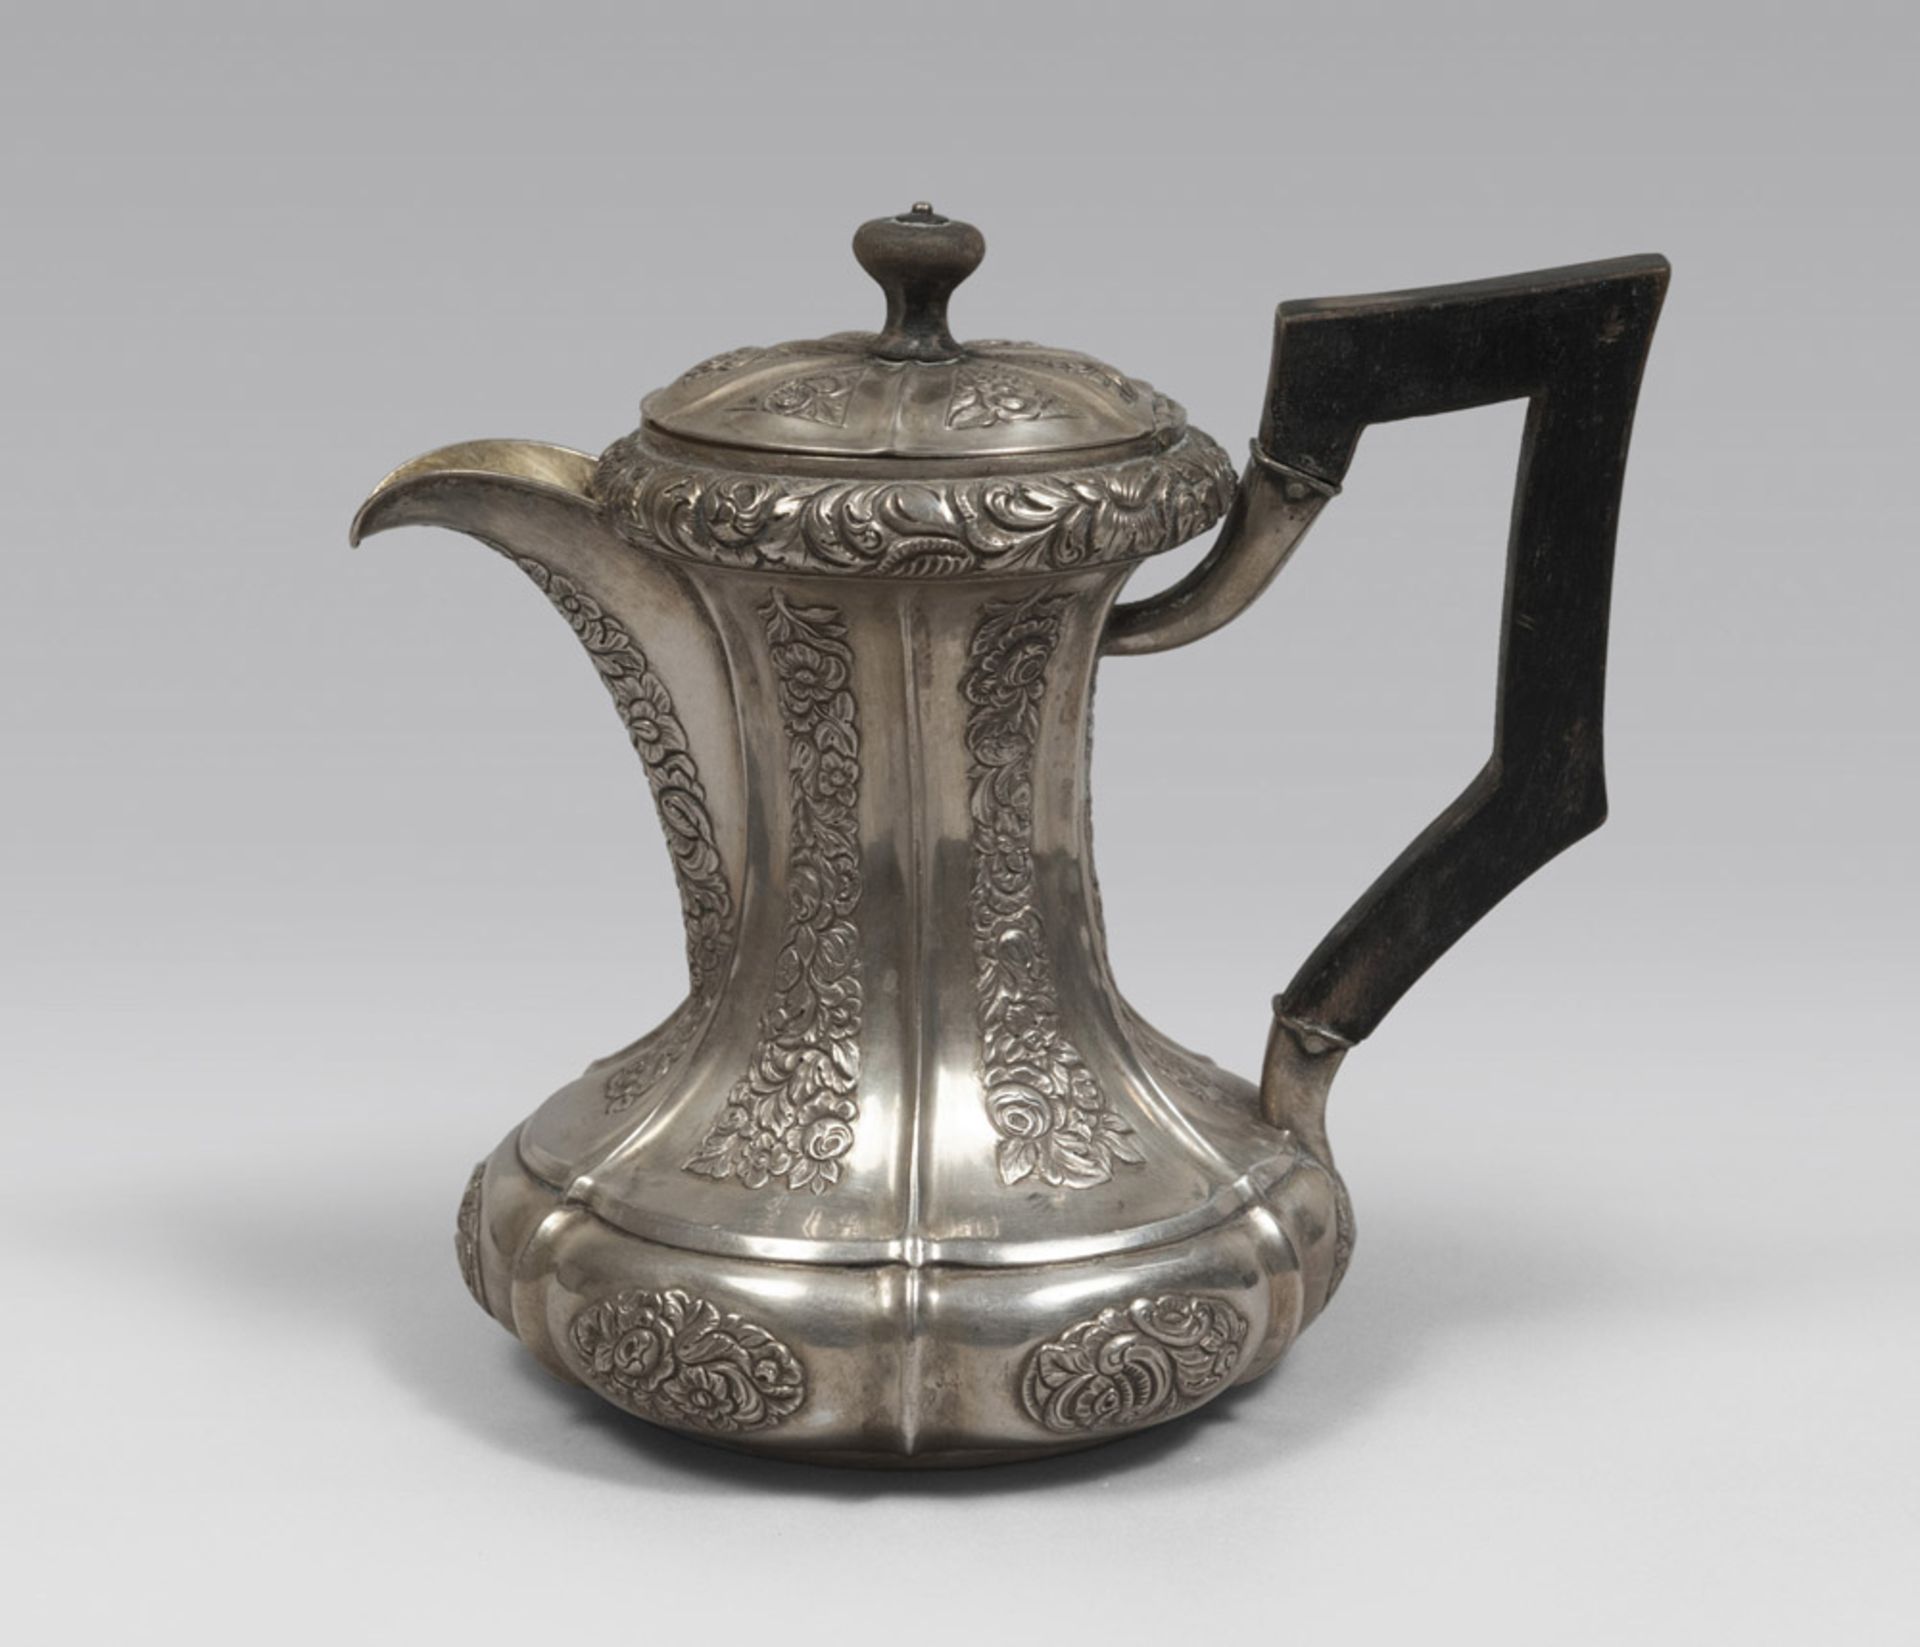 SILVER TEAPOT WITH EBONY HANDLE, PROBABLY AUSTRIA LATE 18TH CENTURY. Measures cm. 19 x 15 x 22,